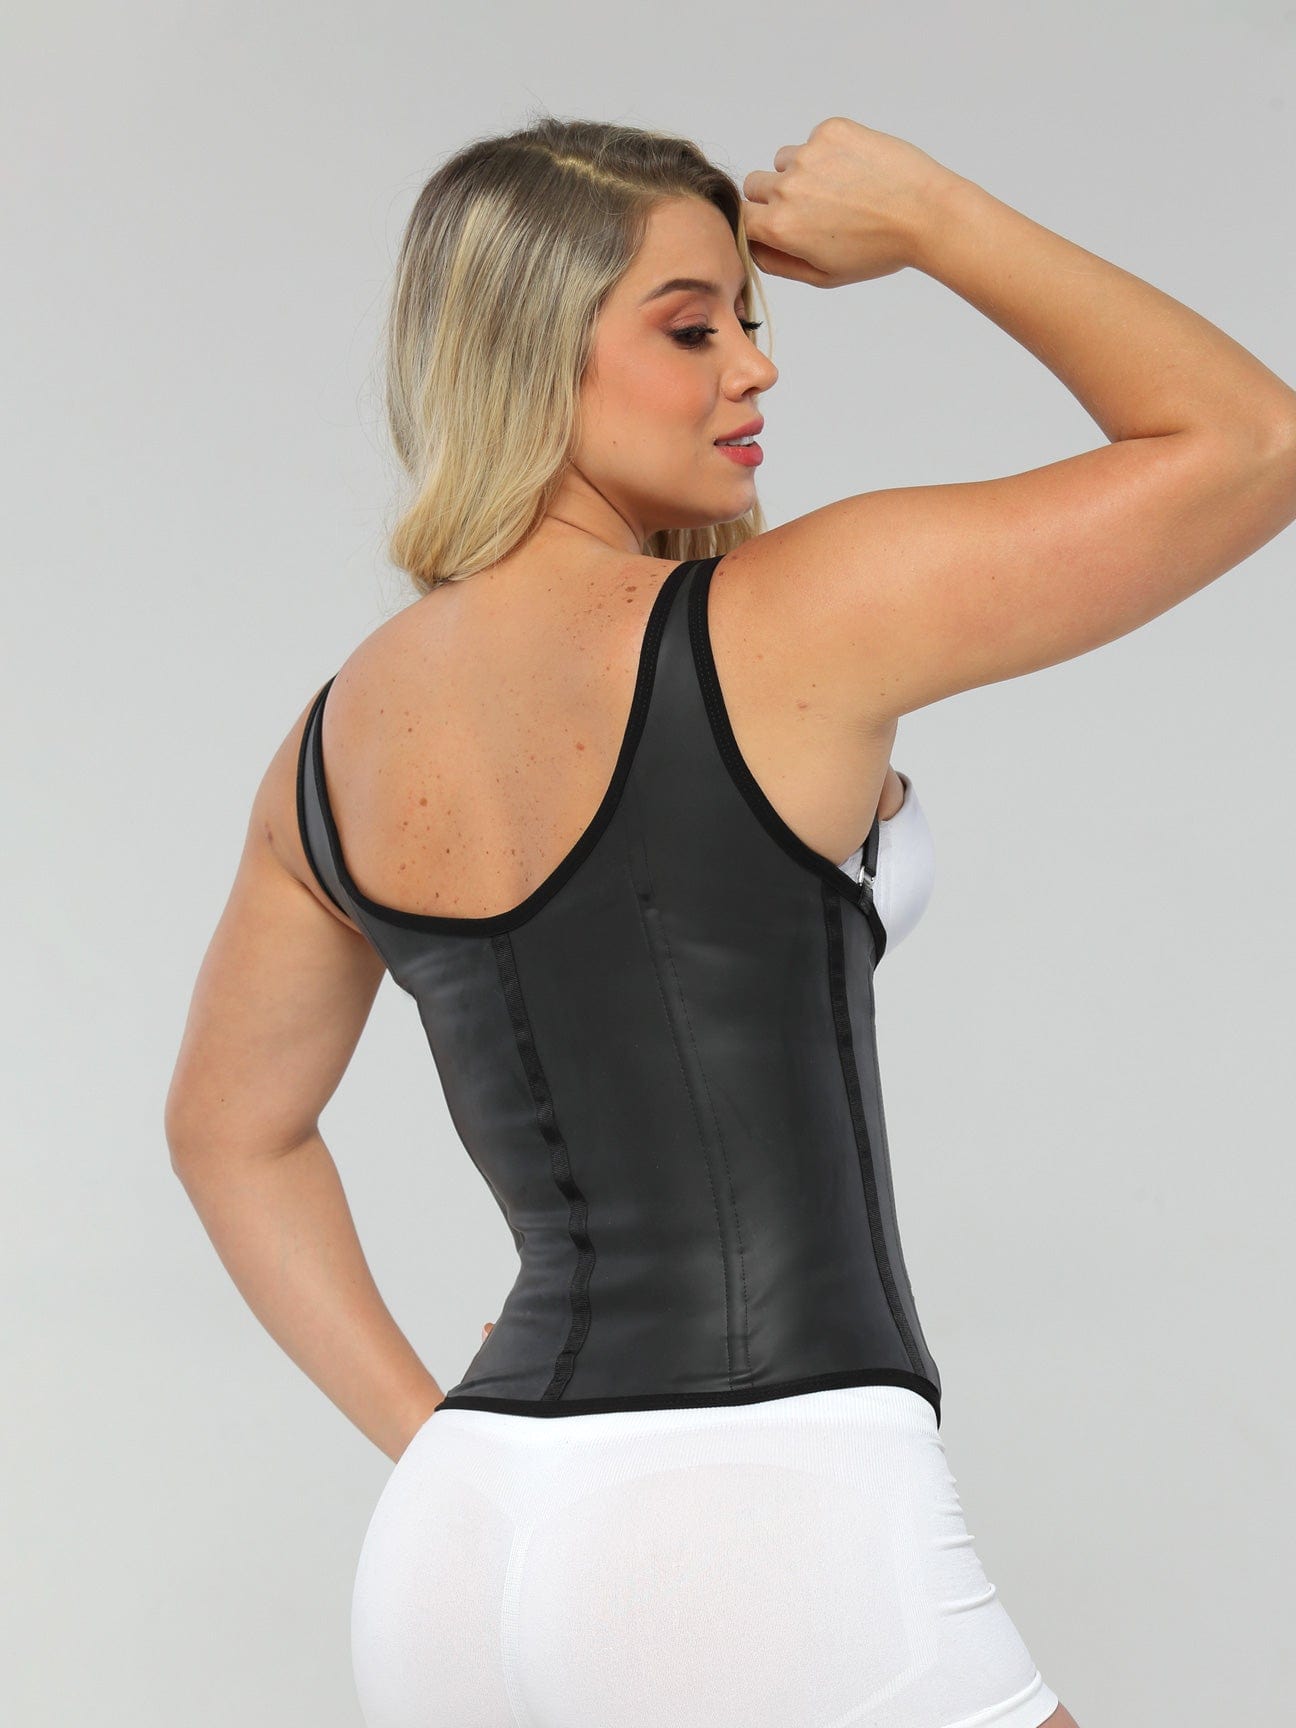 Burvogue Colombian Womens Cross Compression Waist Trainer Corset With 17  Steel Bones And Latex Trimmer For Slim Hourglass Body 230826 From Niao07,  $21.92